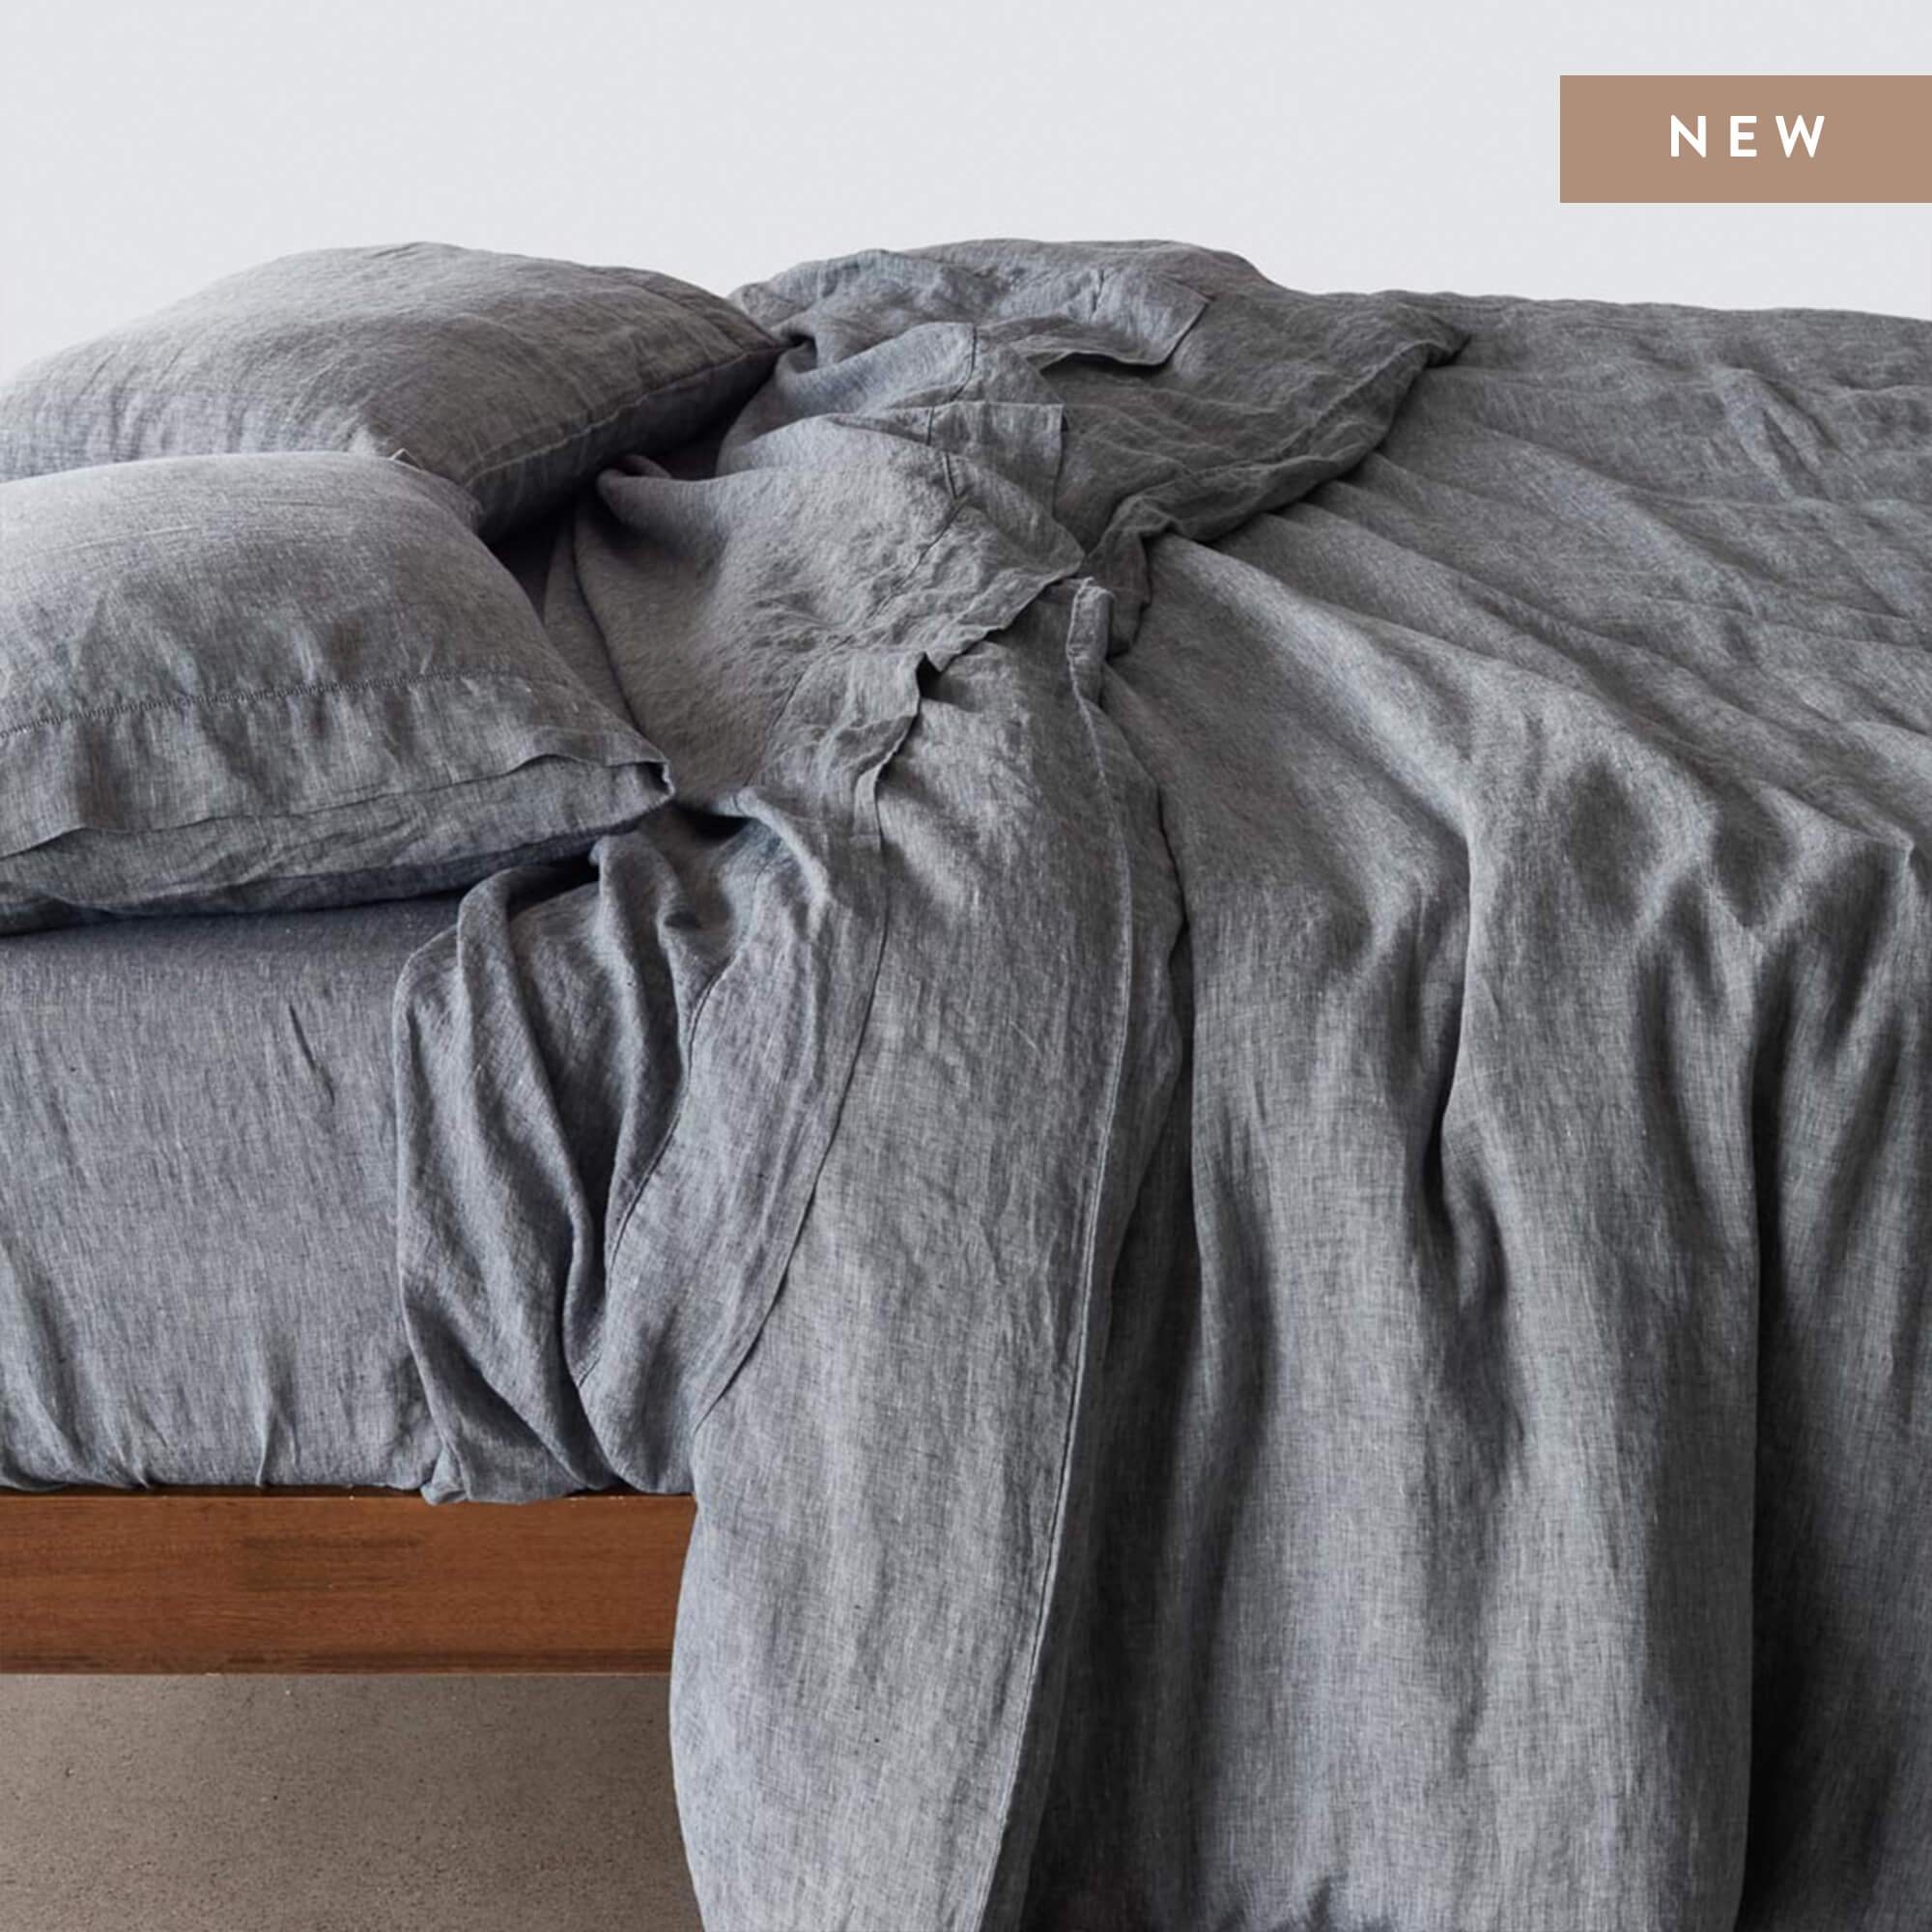 Stonewashed Linen Duvet Cover - Indigo Chambray - King By The Citizenry - Image 0